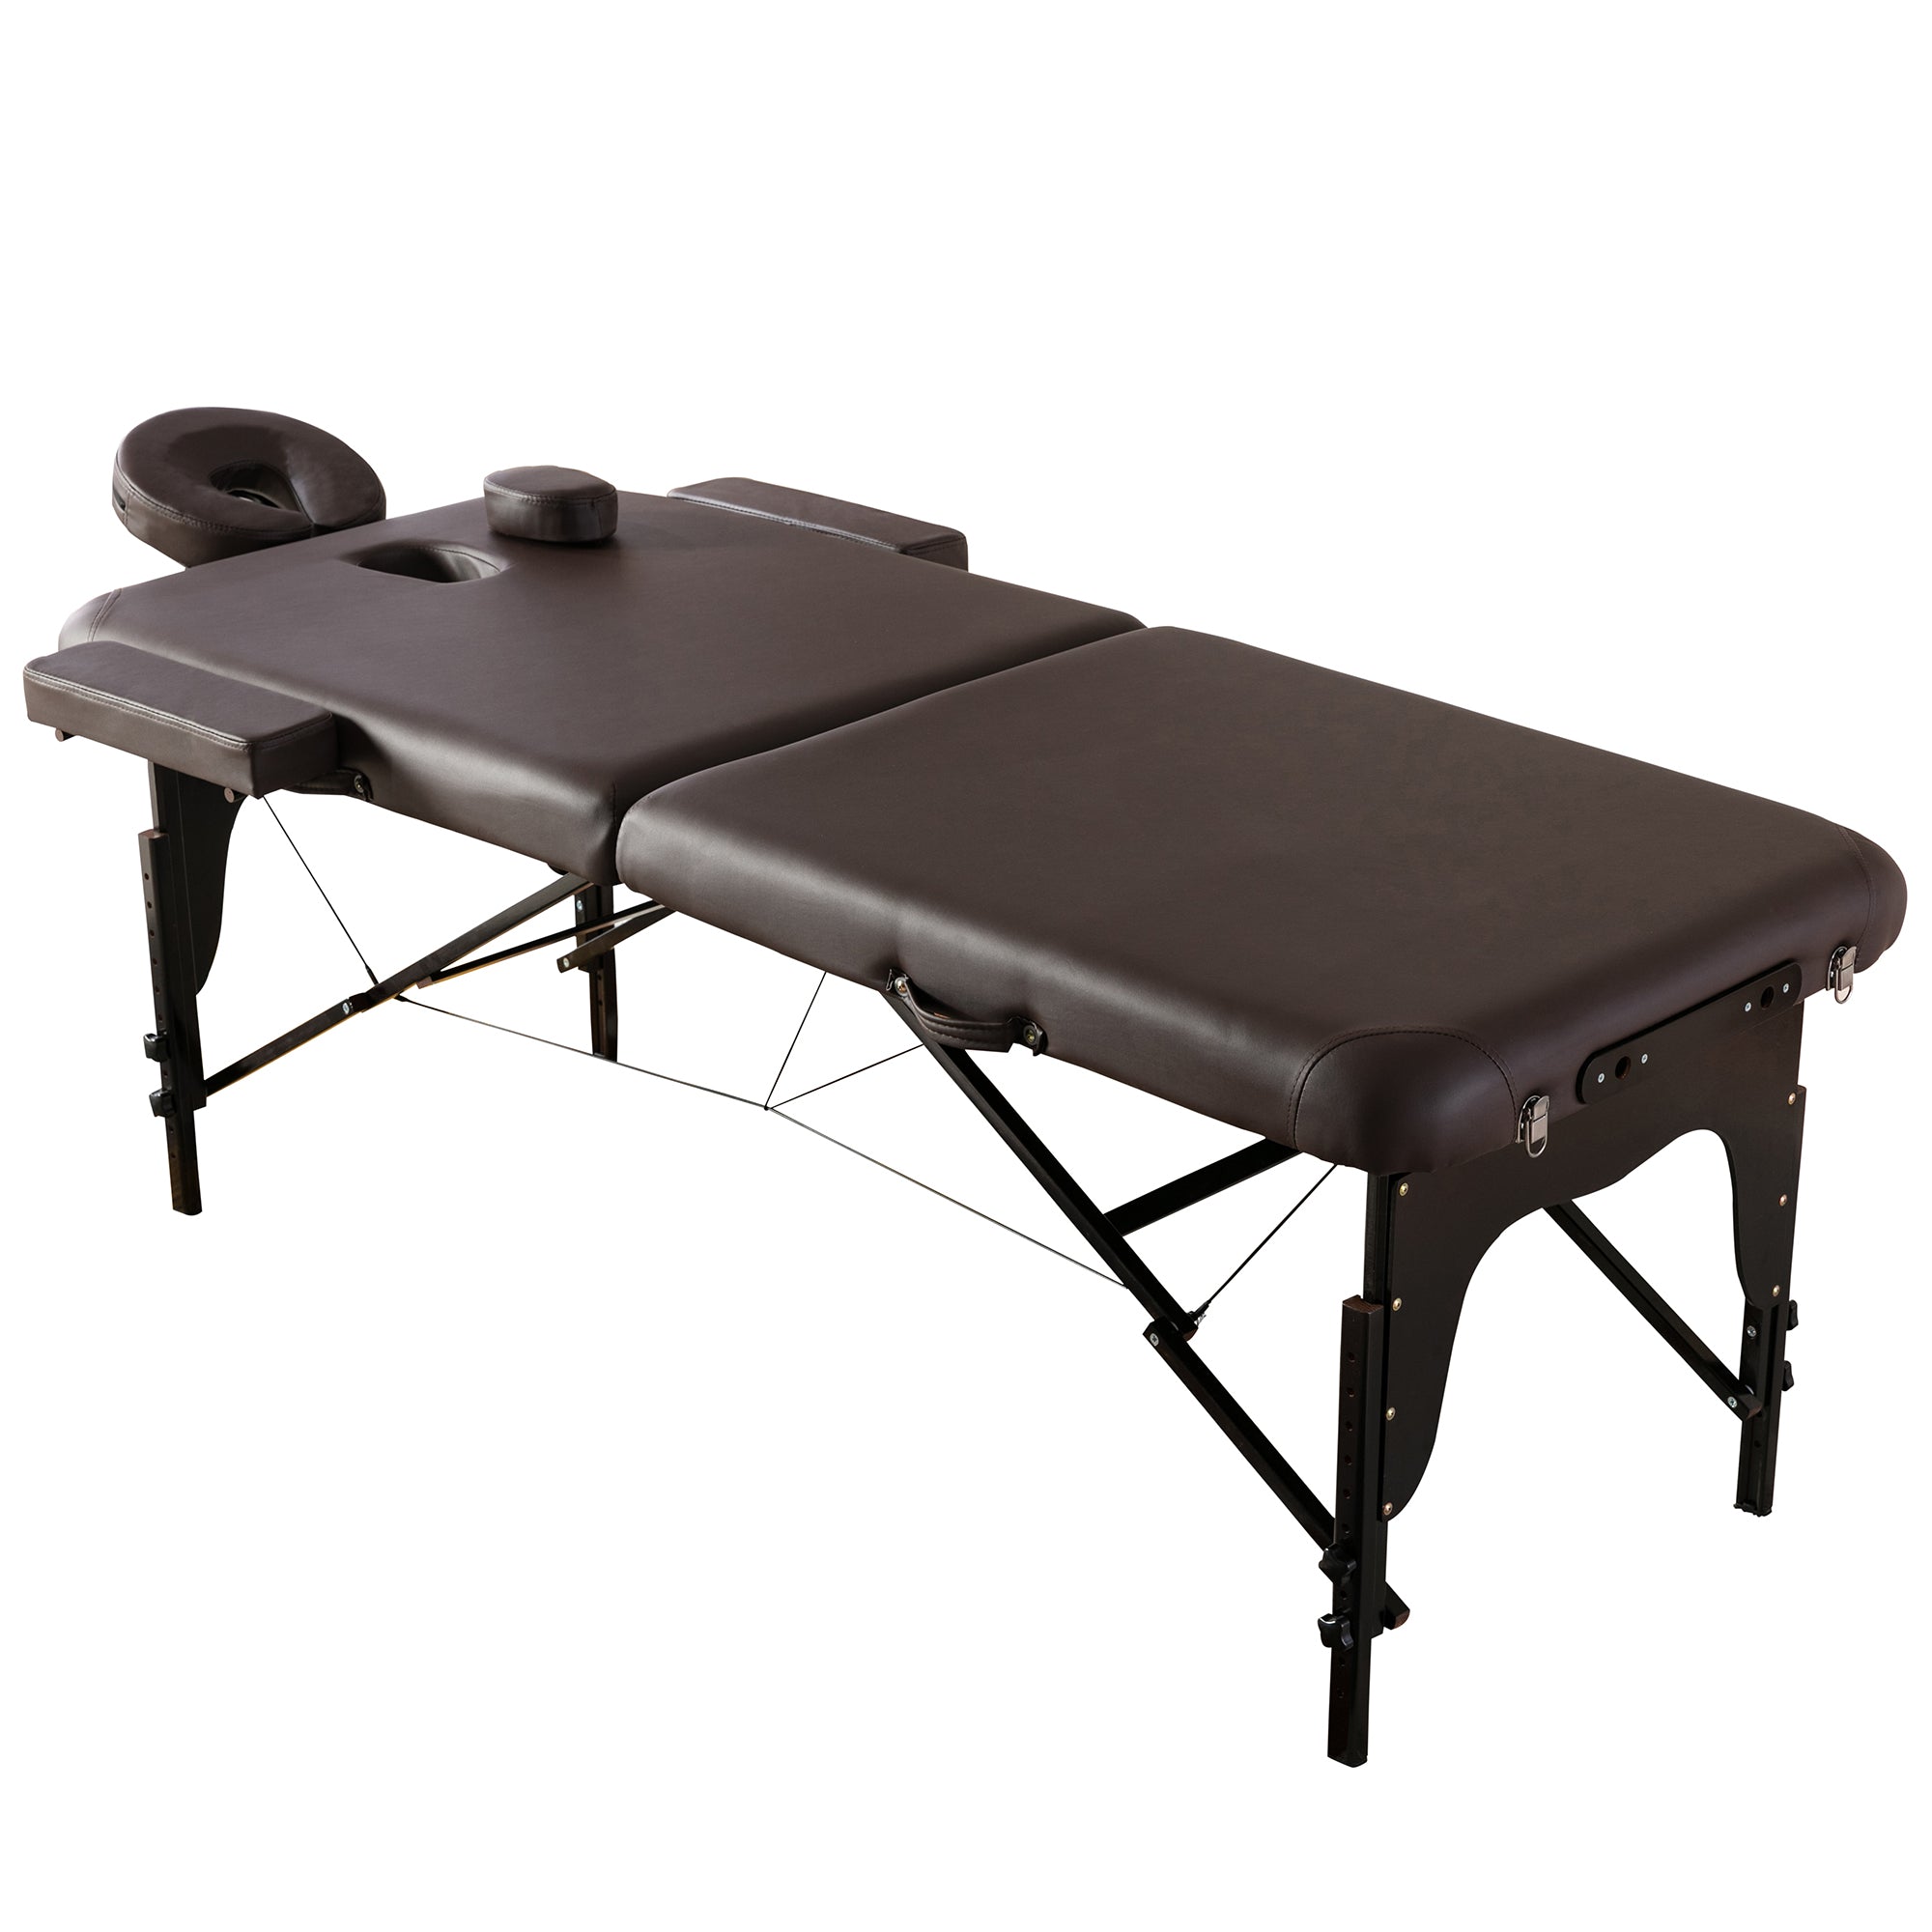 Portable Massage table, 2 Section Wooden Adjustable Folding Massage Table, PU leather  Spa  Bed